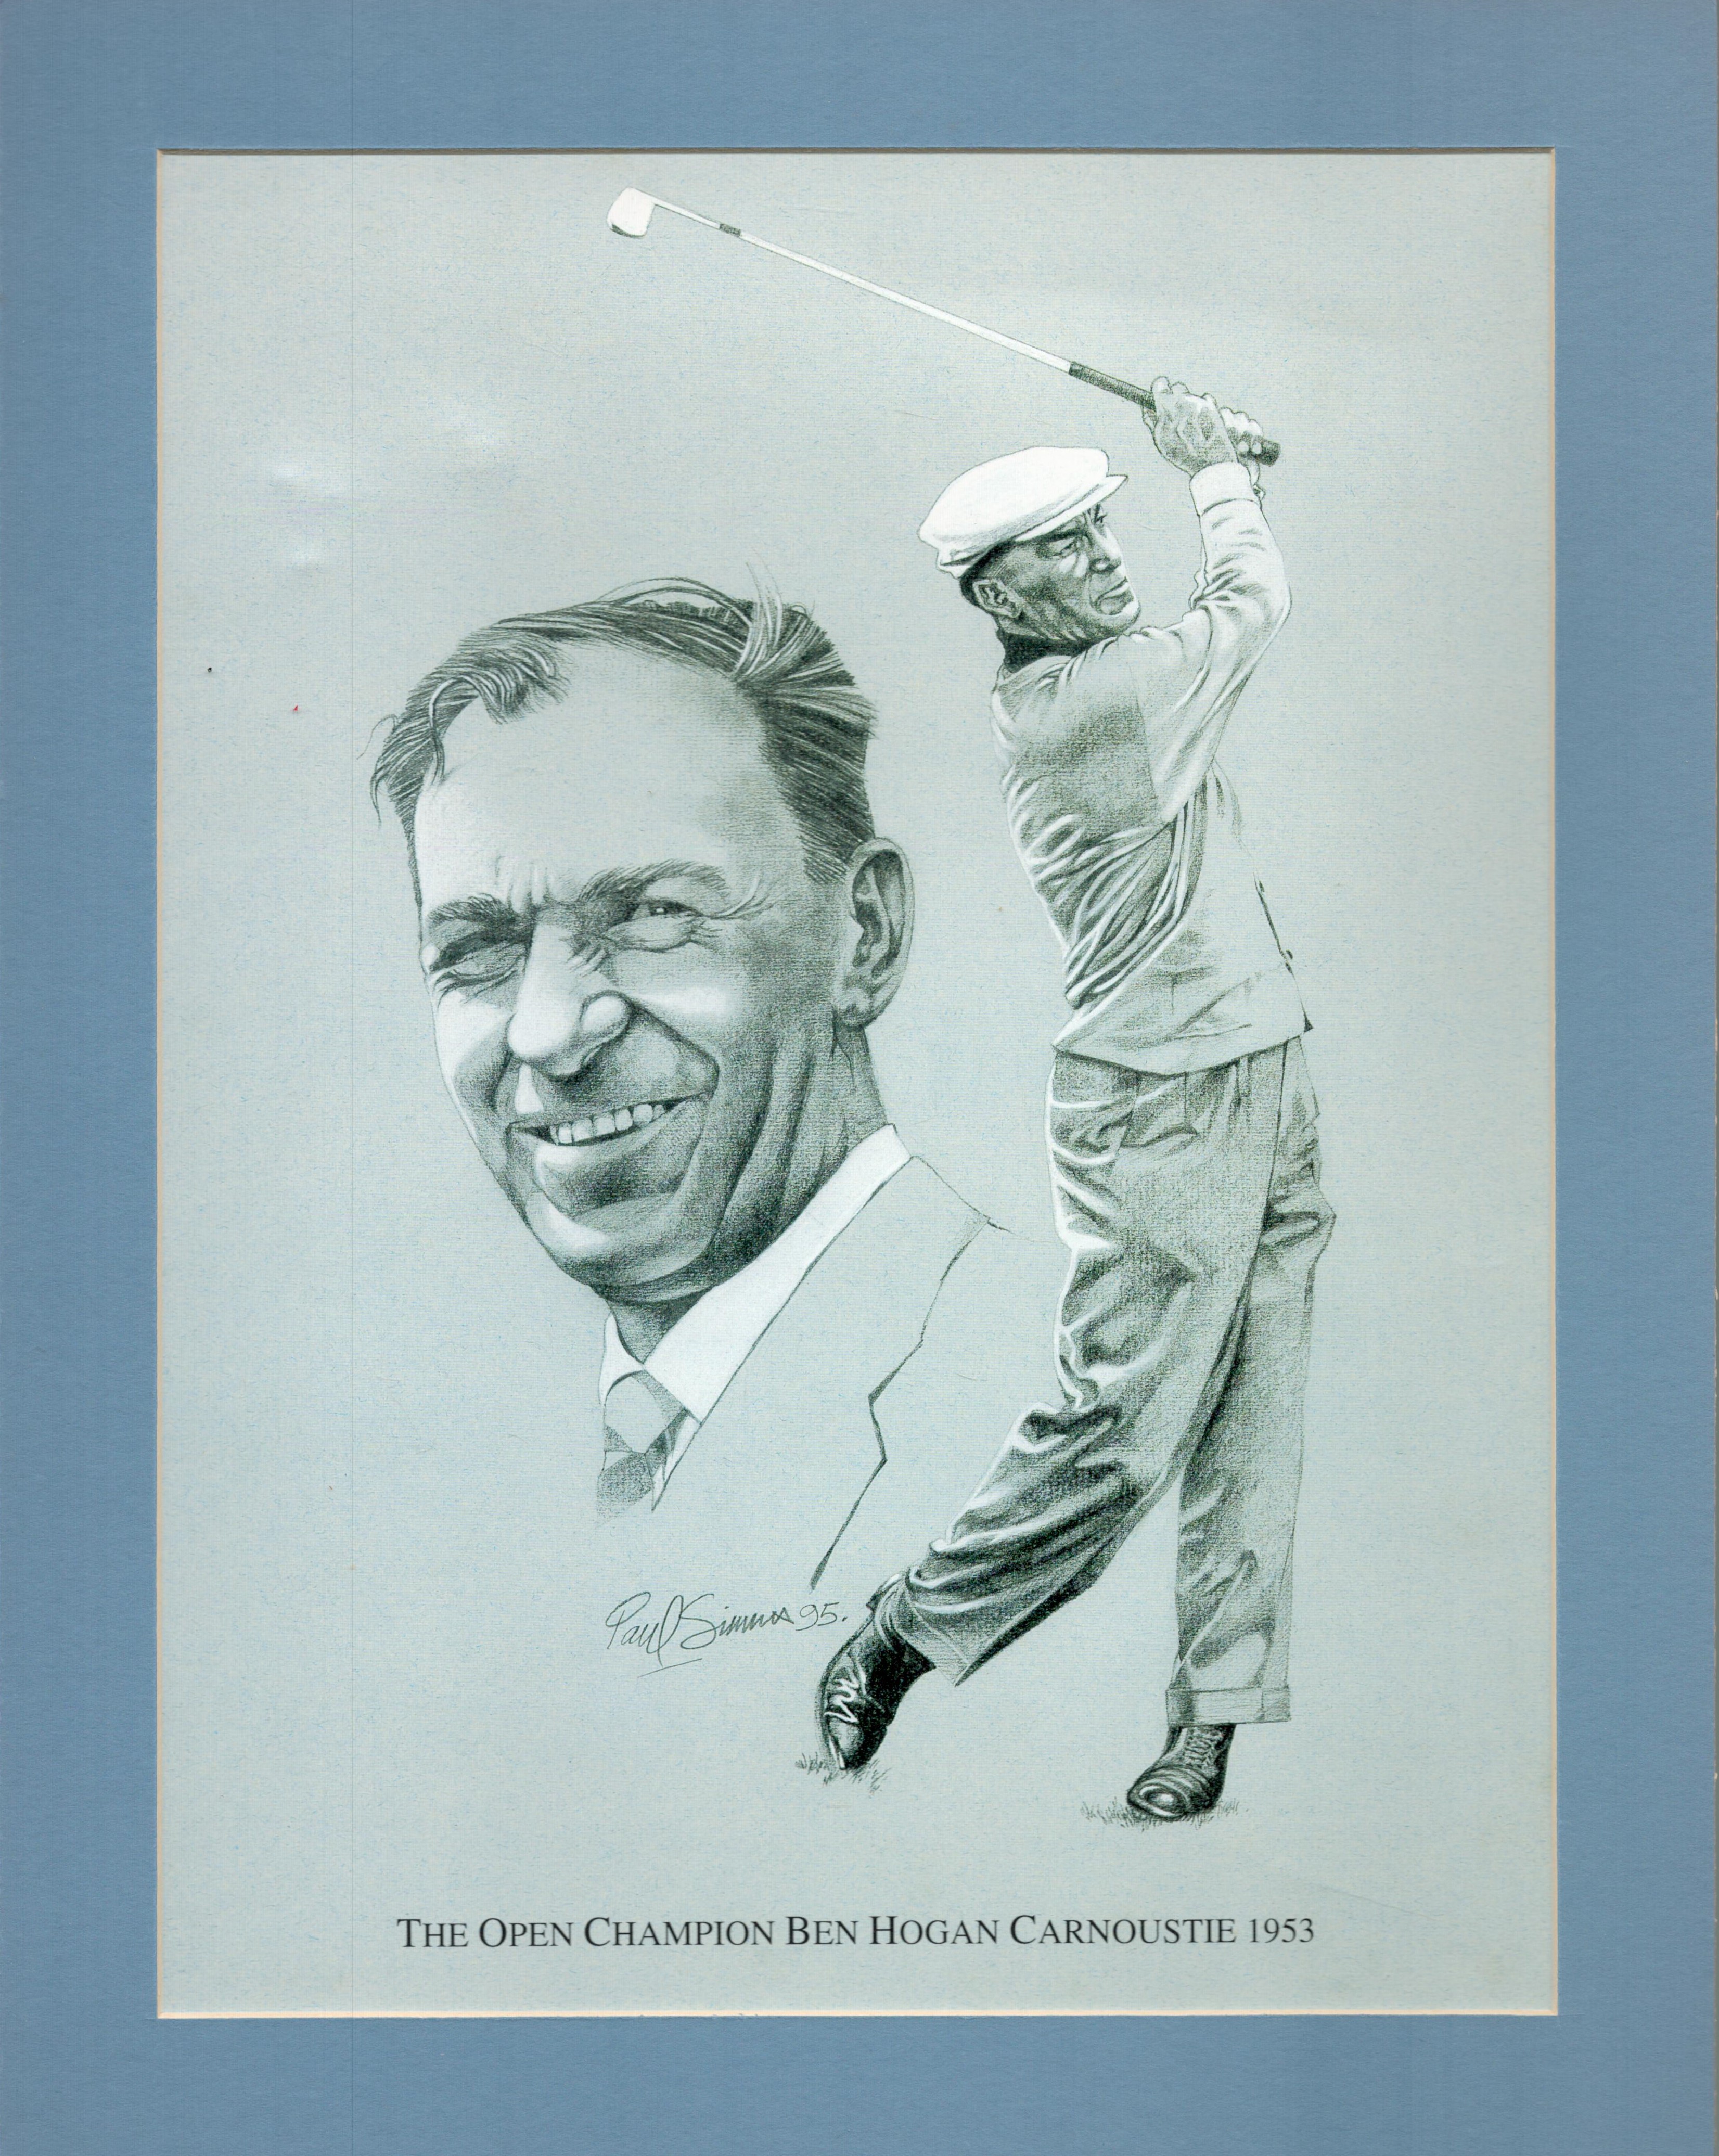 Golf Collection of 3 Black and White Prints with Artist Paul Simms Printed Signature on all. - Image 3 of 3